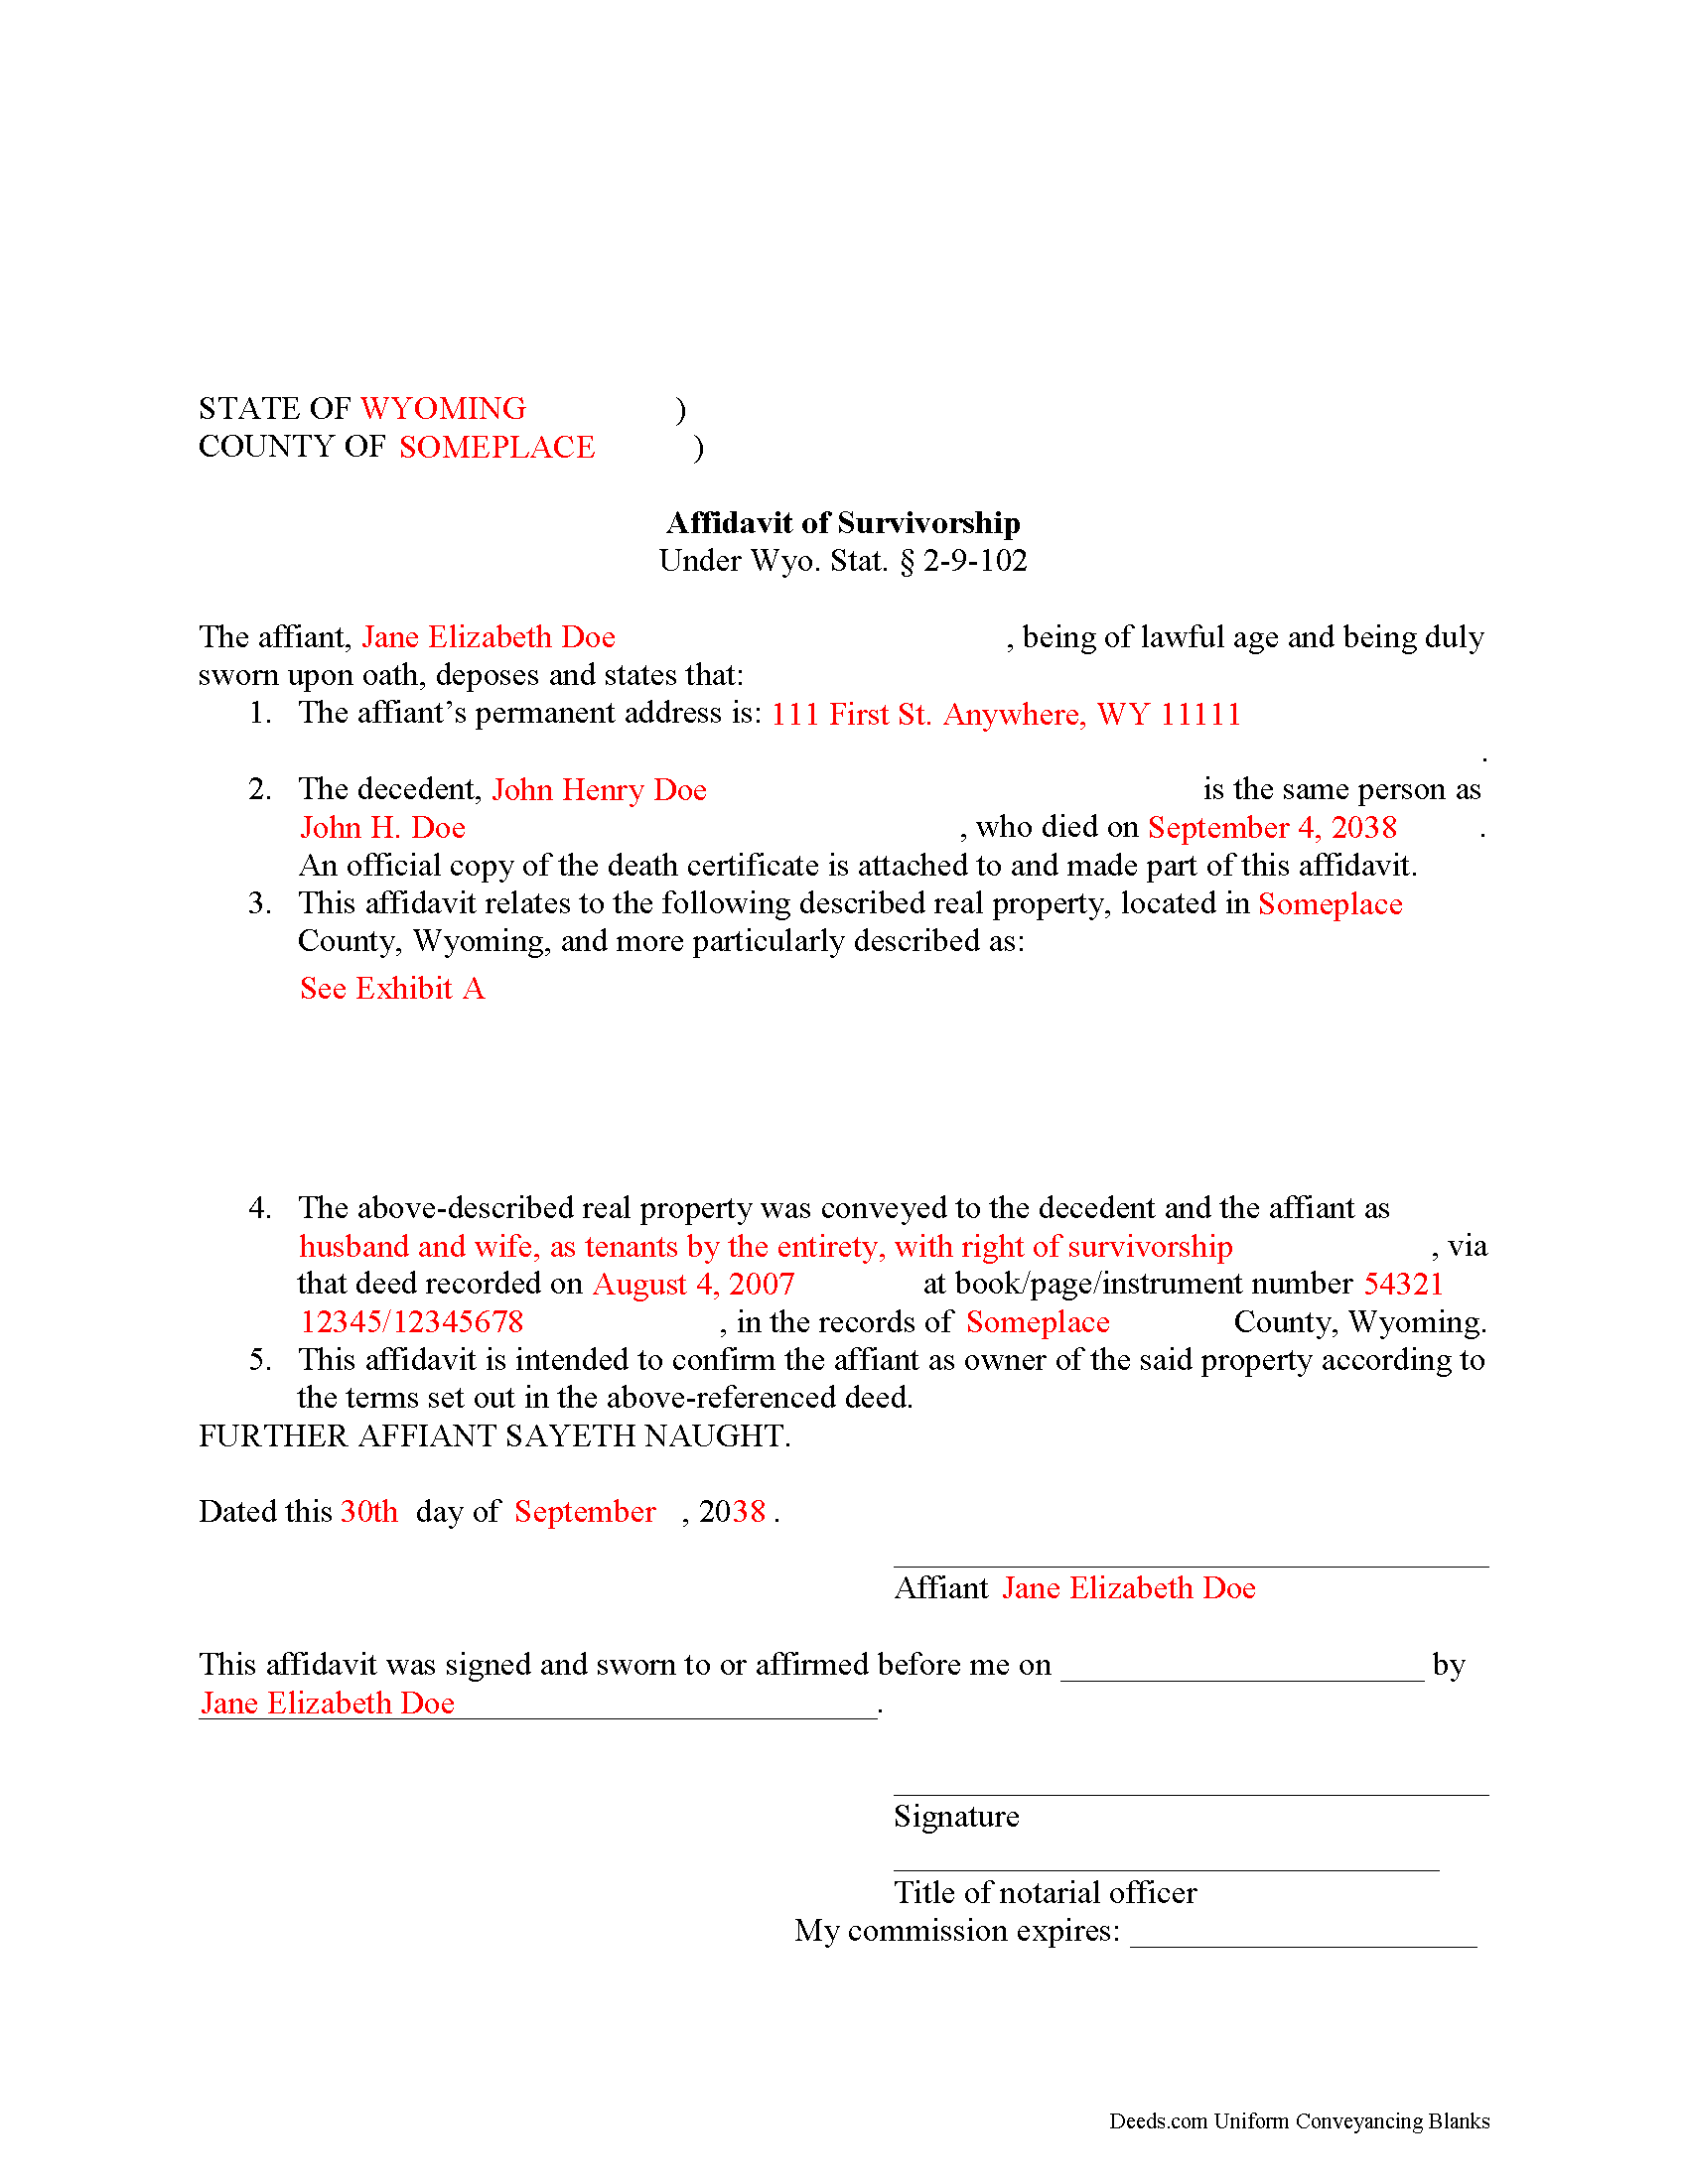 Completed Example of the Affidavit of Survivorship Document